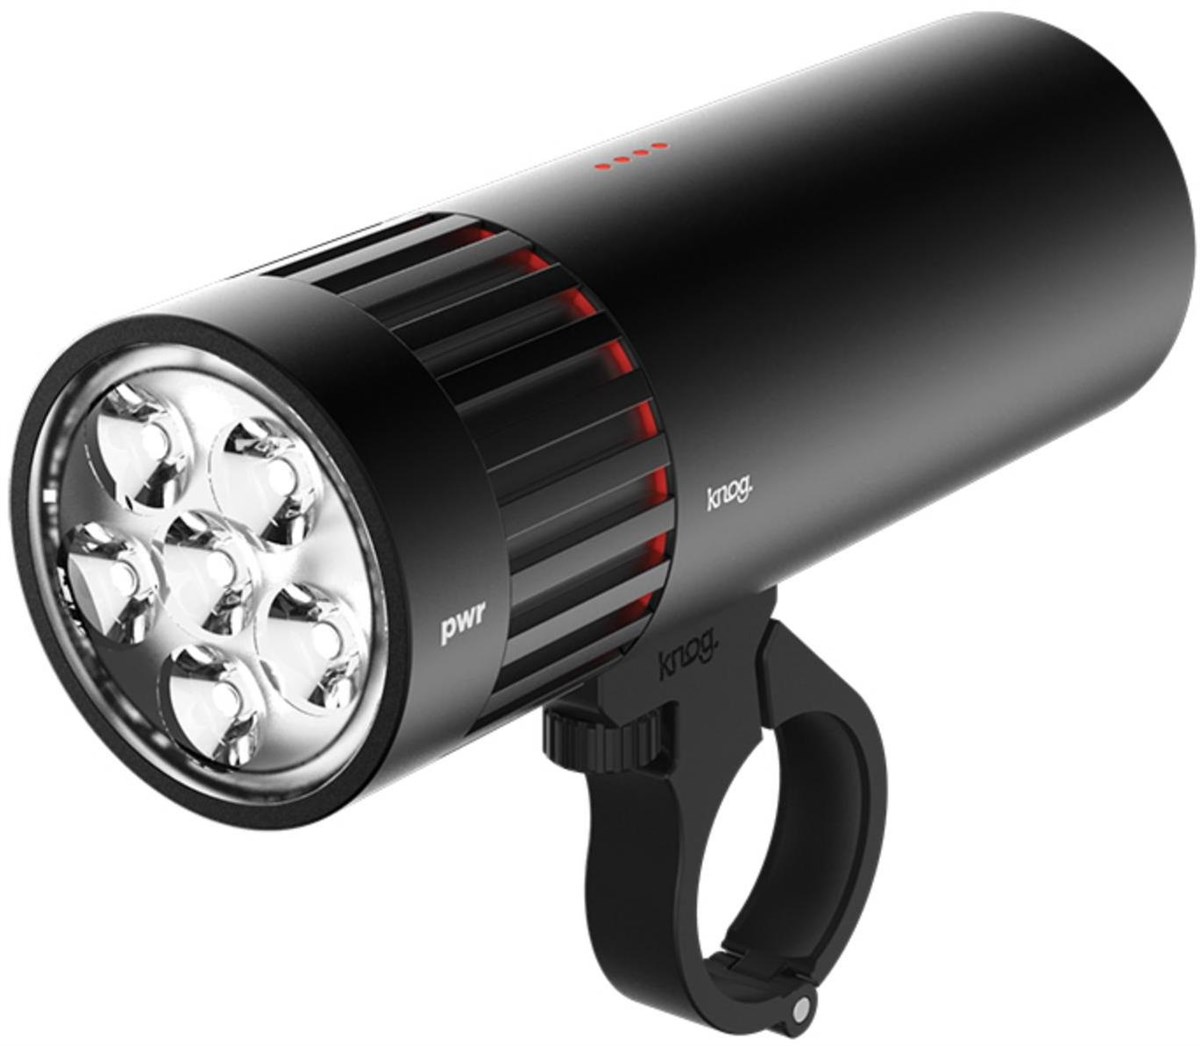 Knog PWR Mountain 2000 USB Rechargeable Front Light product image